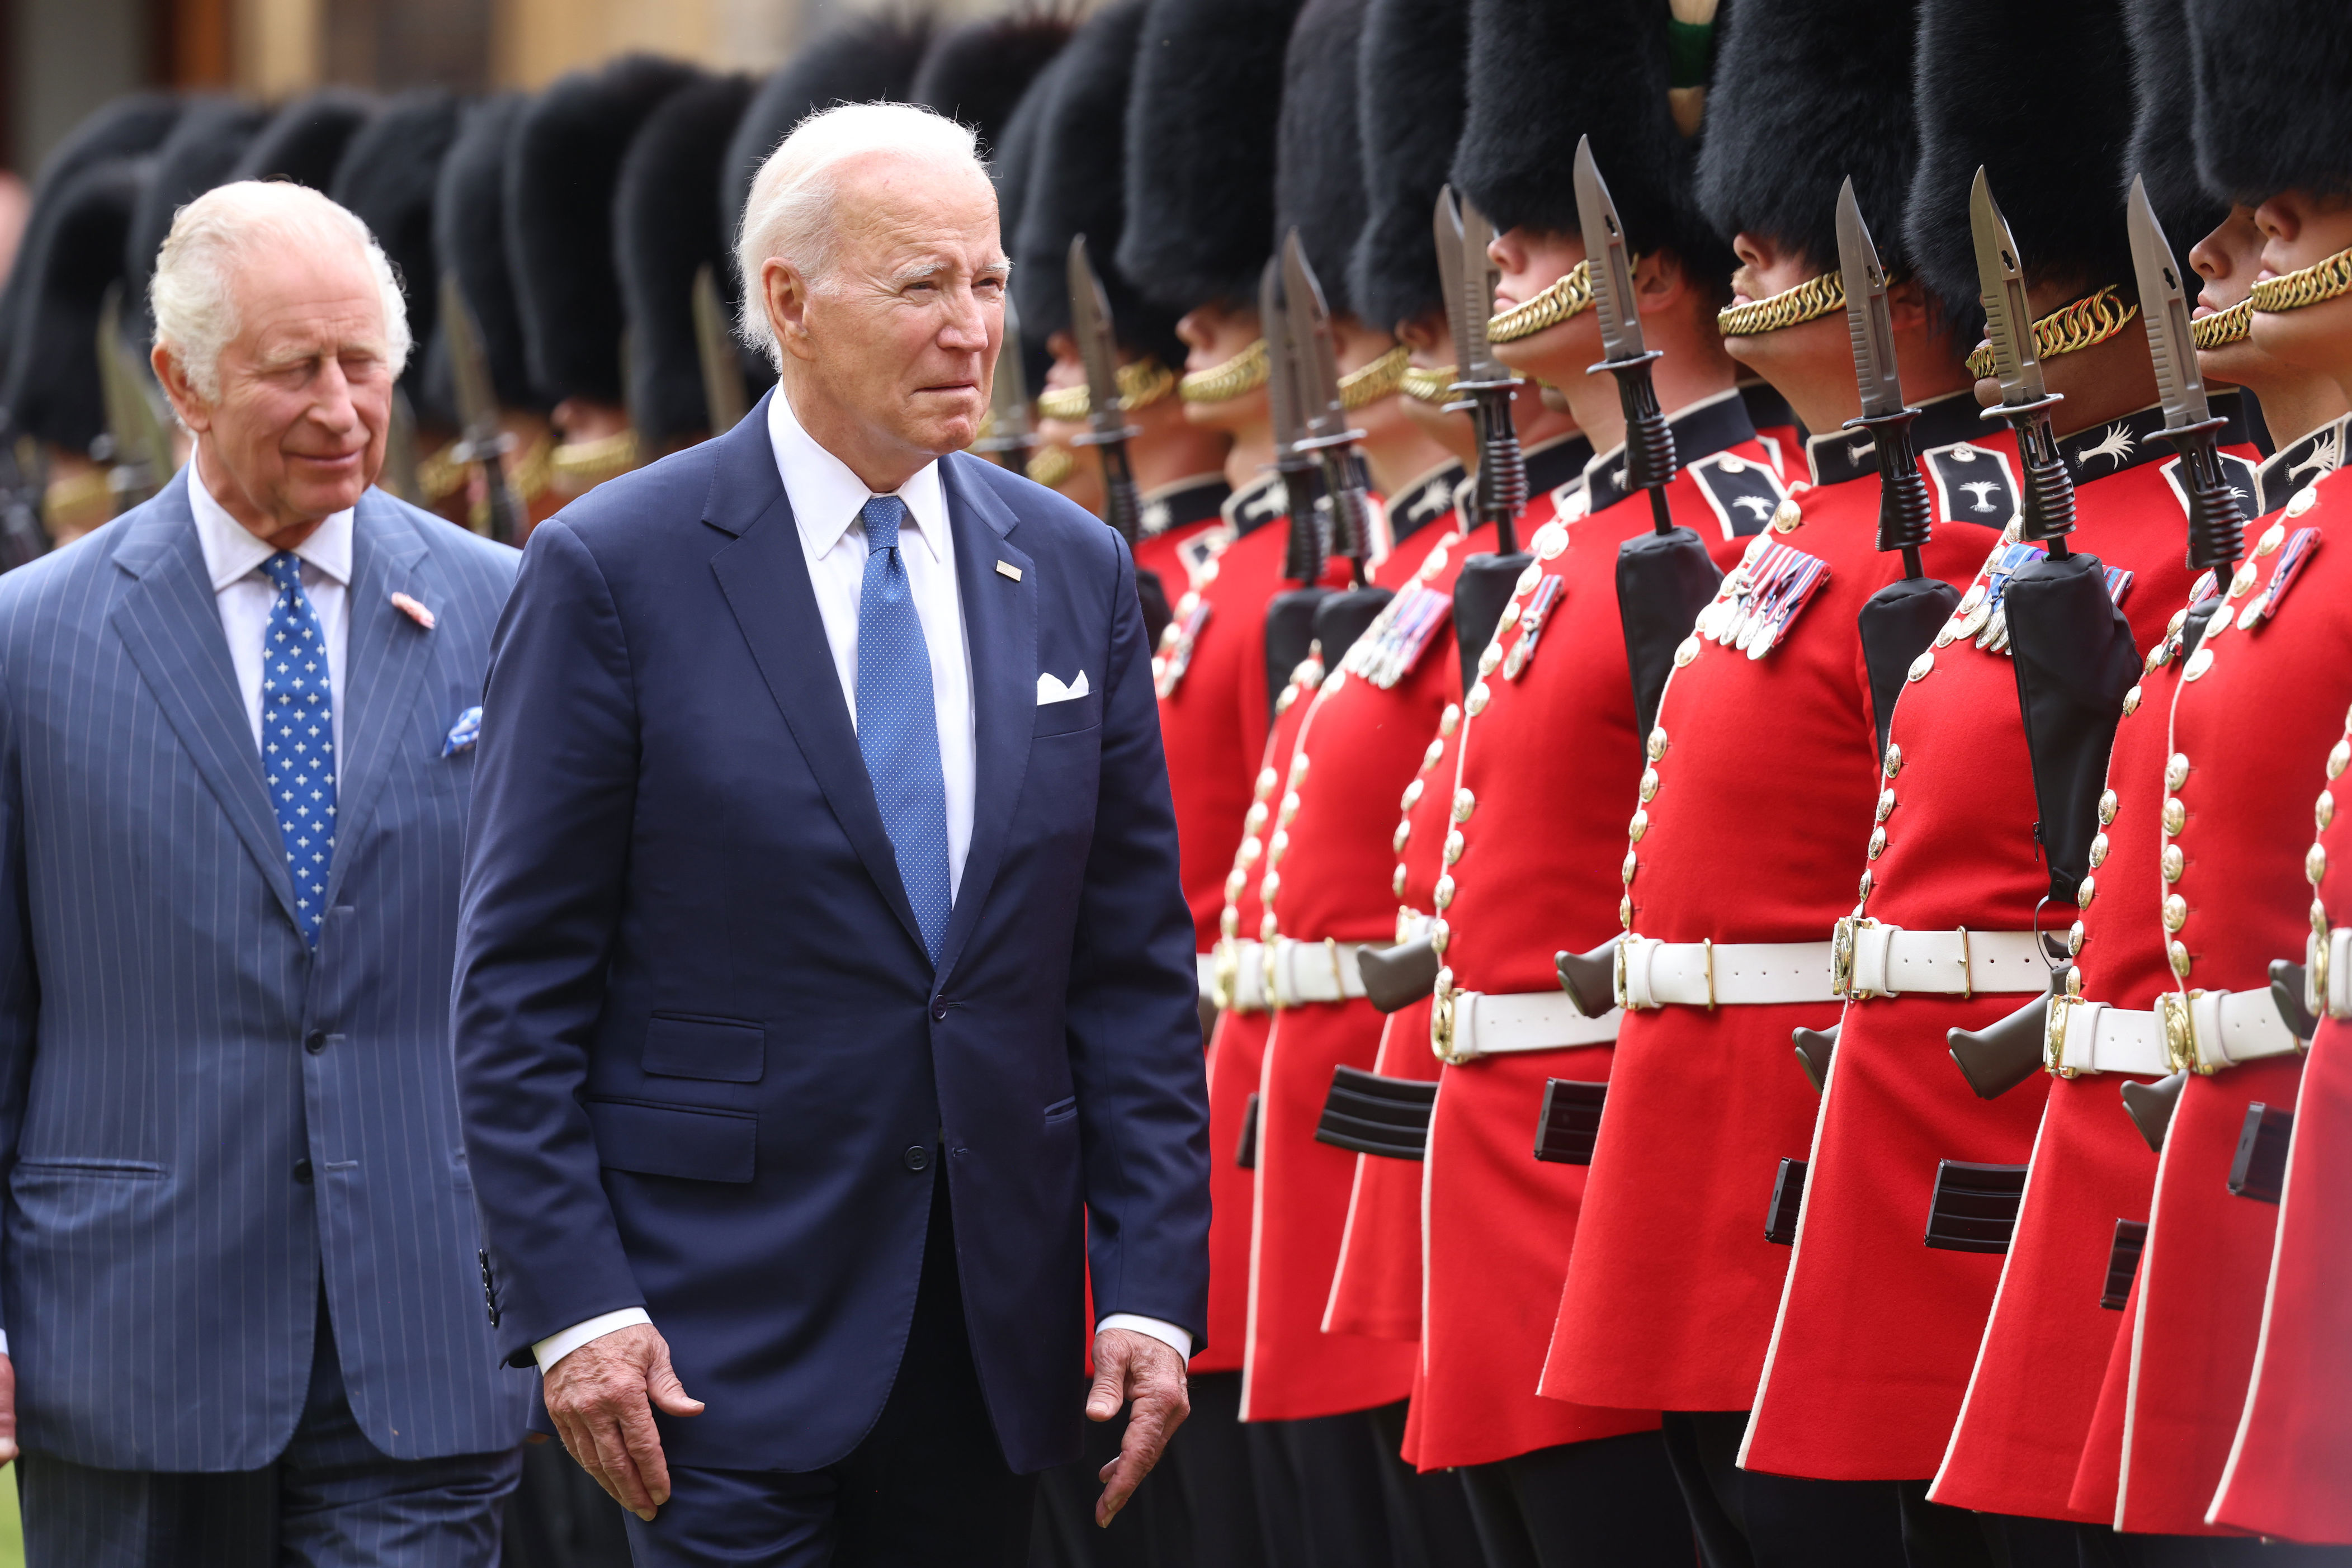 <p>King Charles III and President Joe Biden <a href="https://www.wonderwall.com/celebrity/royals/see-king-charles-iii-meetings-with-american-u-s-presidents-over-the-years-prince-charles-camilla-652116.gallery">reviewed a guard of honour</a> at Windsor Castle in Windsor, England, on July 10, 2023. The president visited Britain to further strengthen the close relationship between the nations and to discuss climate issues with the monarch.</p>